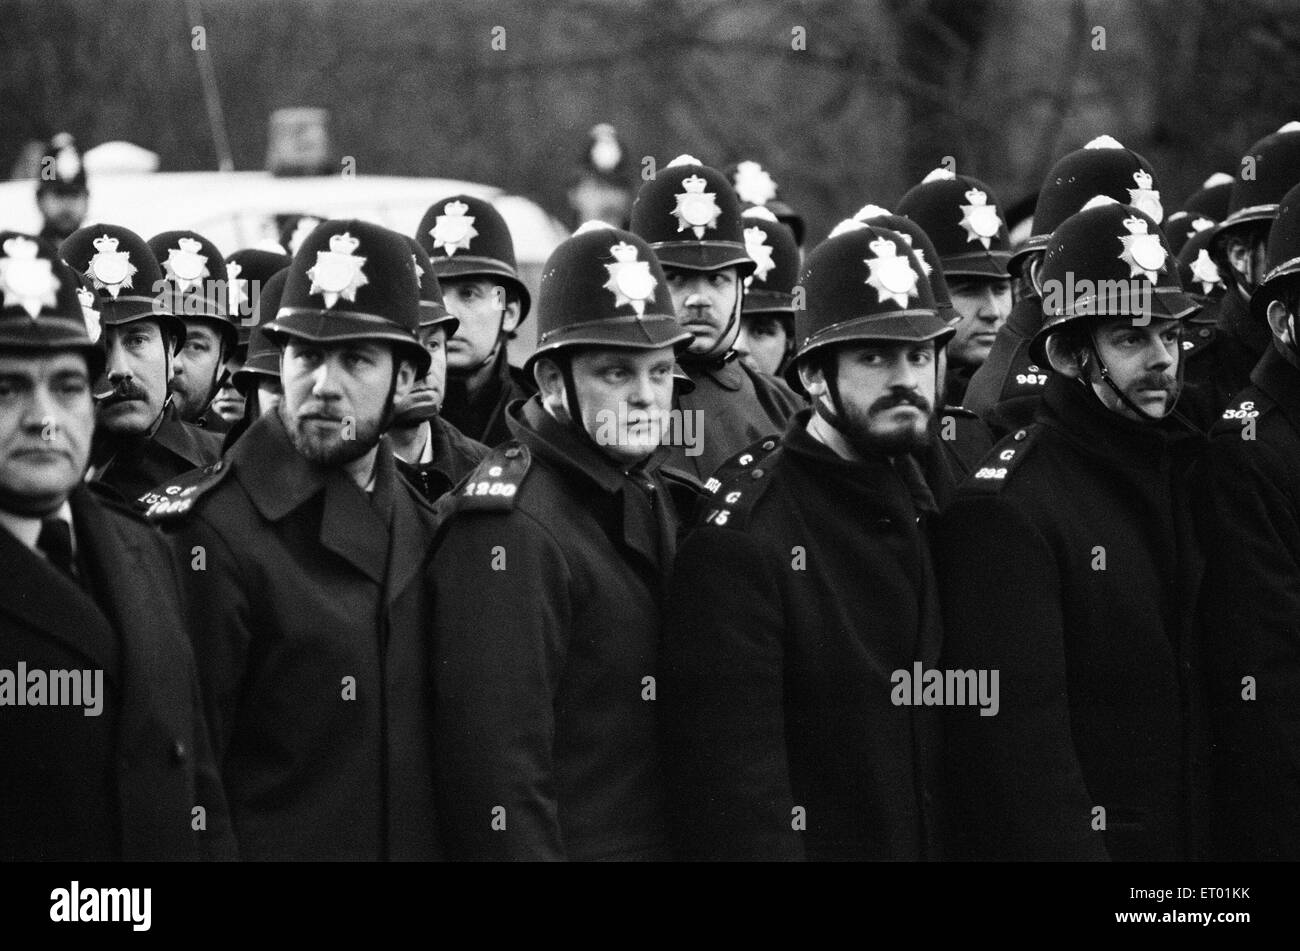 Miners Strike 1984 - 1985, Pictured. Pickets and Police clash at Daw Mill Colliery, near the village of Arley, near Nuneaton, Warwickshire, England, Tuesday 27th March 1984. Arthur Scargill, president of the NUM, declared that strikes in the various coal Stock Photo